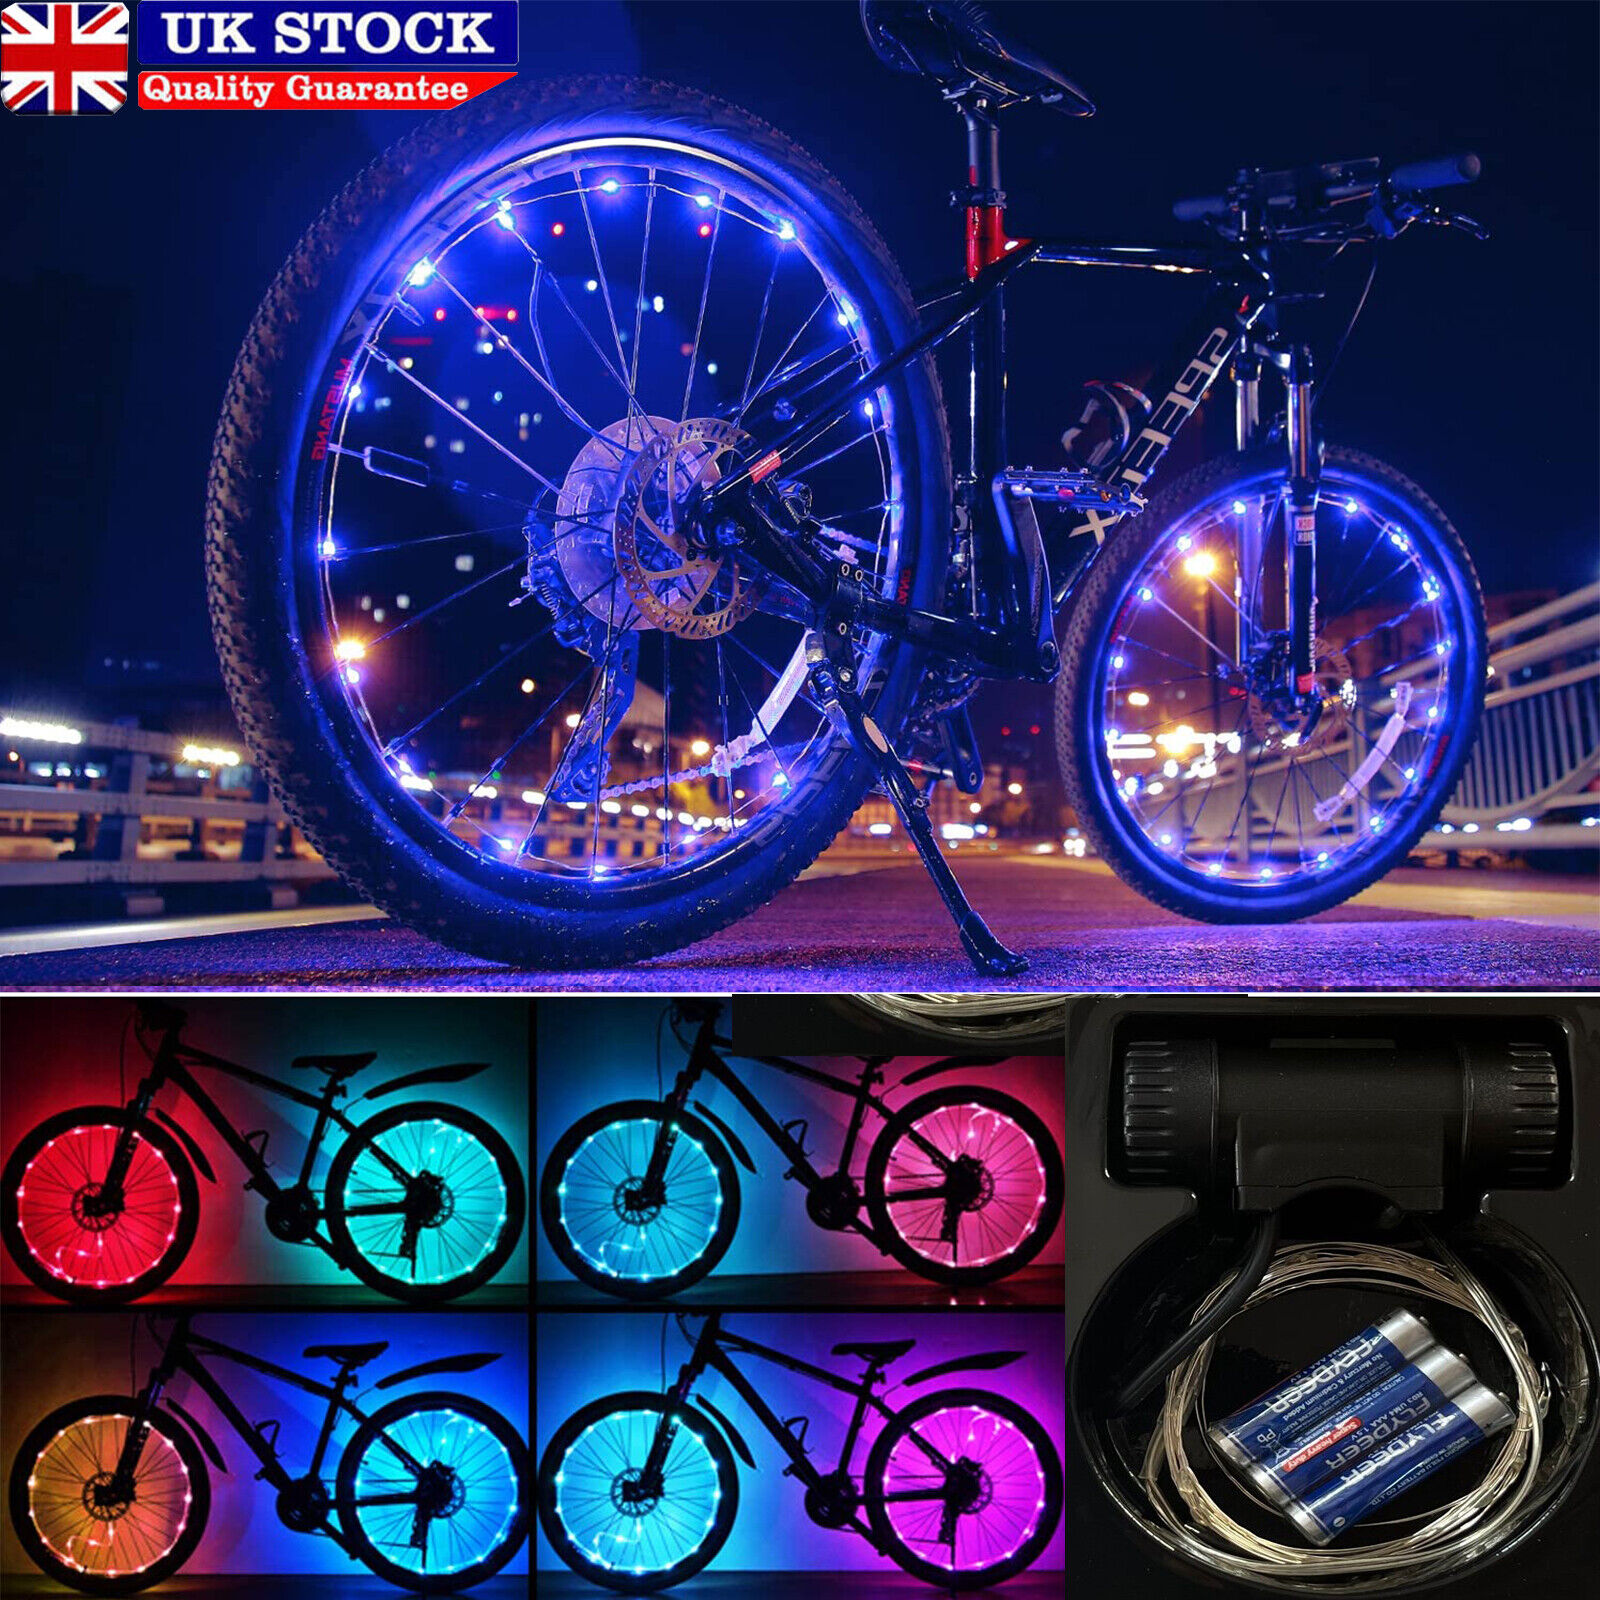 Multi Coloured LED Bike Wheel Lights Brighter and Visible from All Angles for Ultimate Safety and Style 1 Tyre Pack